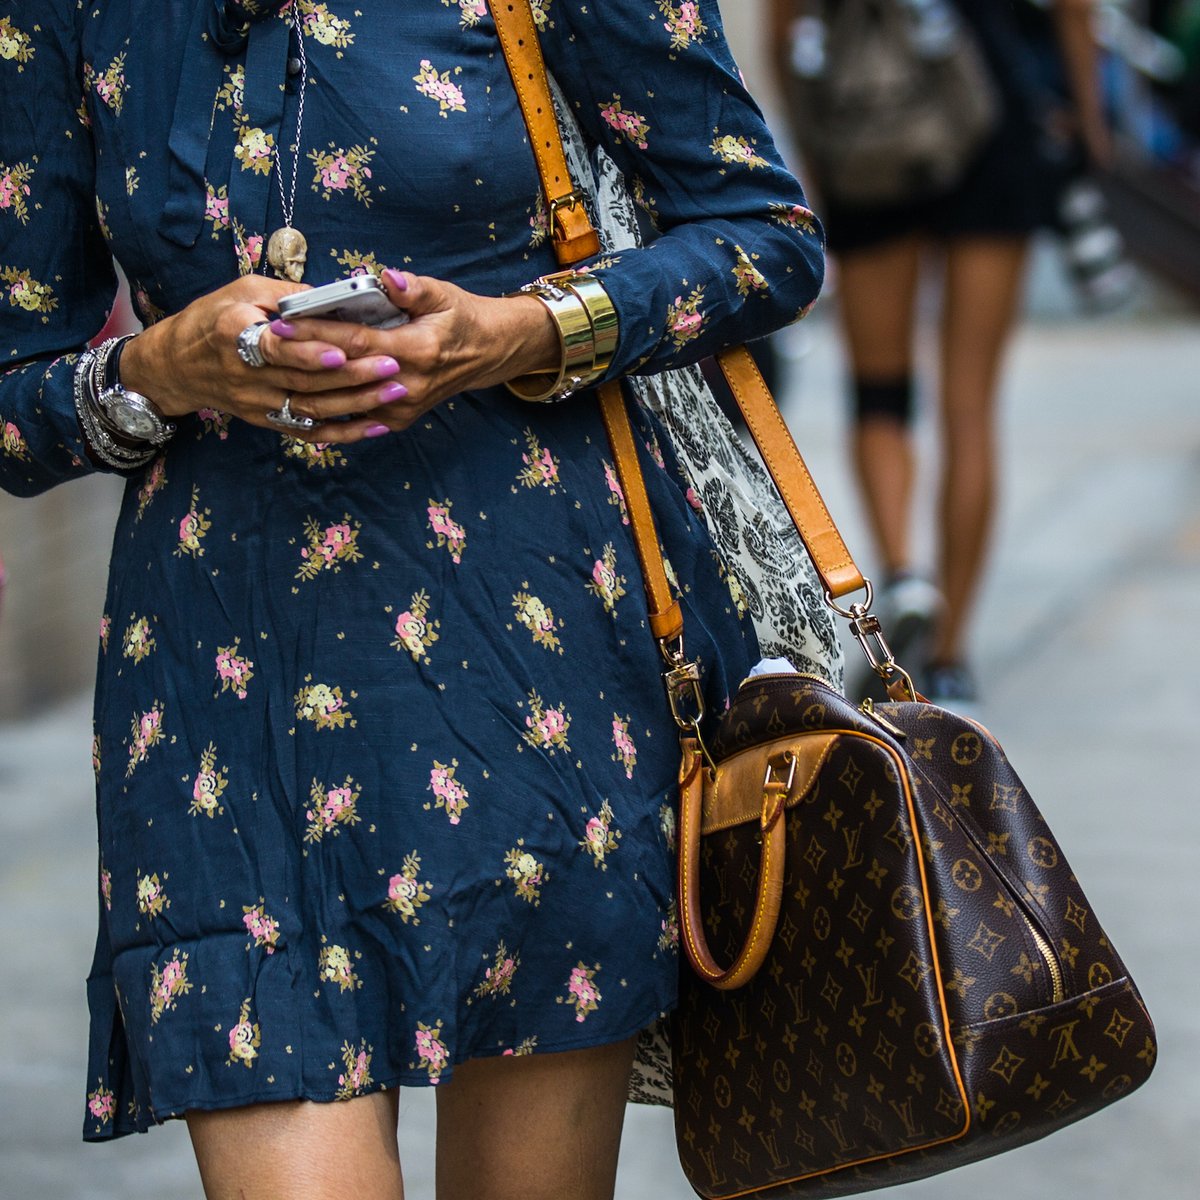 Designer Bag Dupes are a perfect alternative without purchasing knockoffs